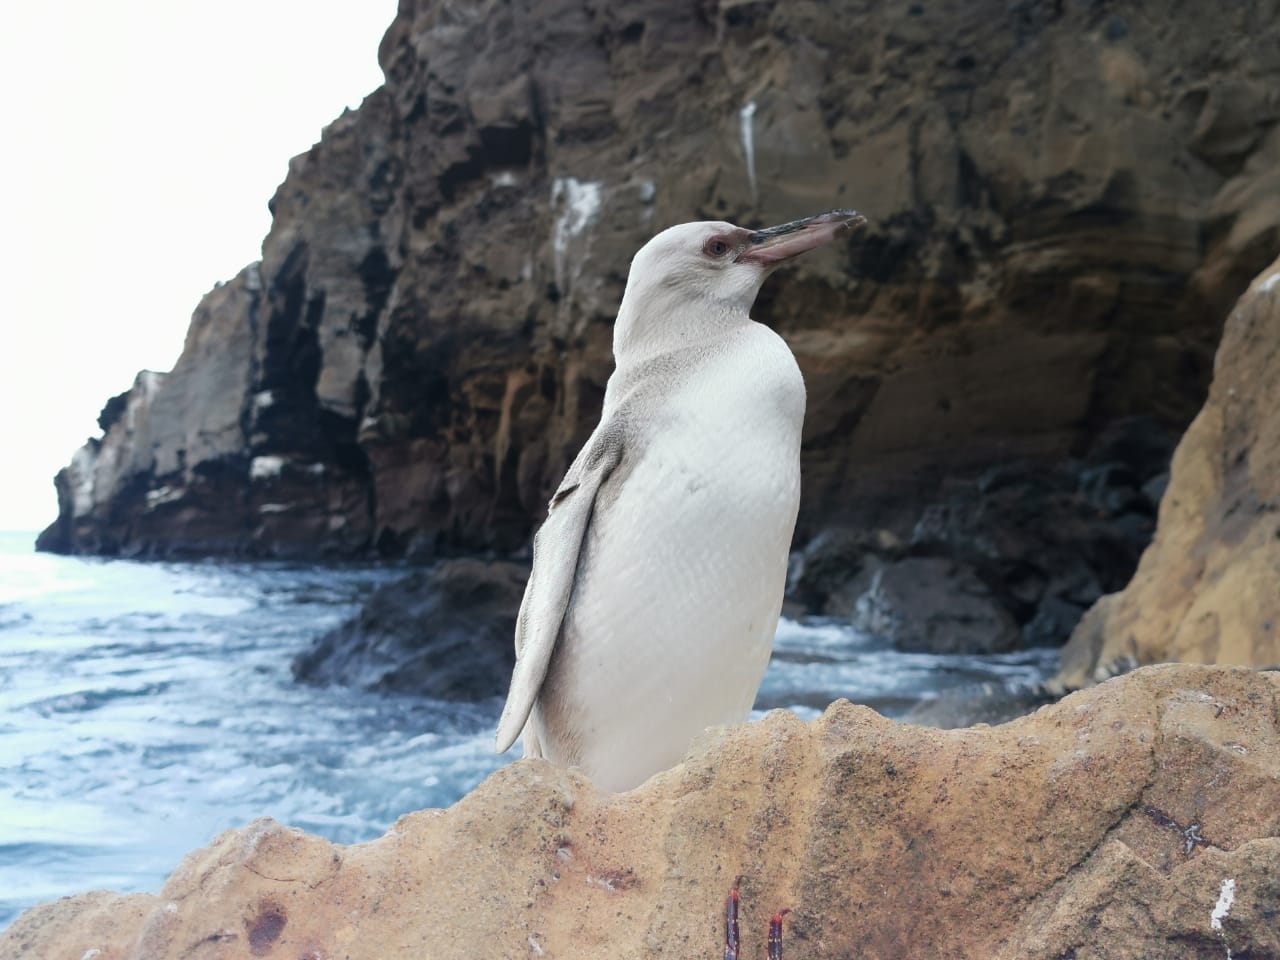 Surprising white penguin in the Galapagos Islands